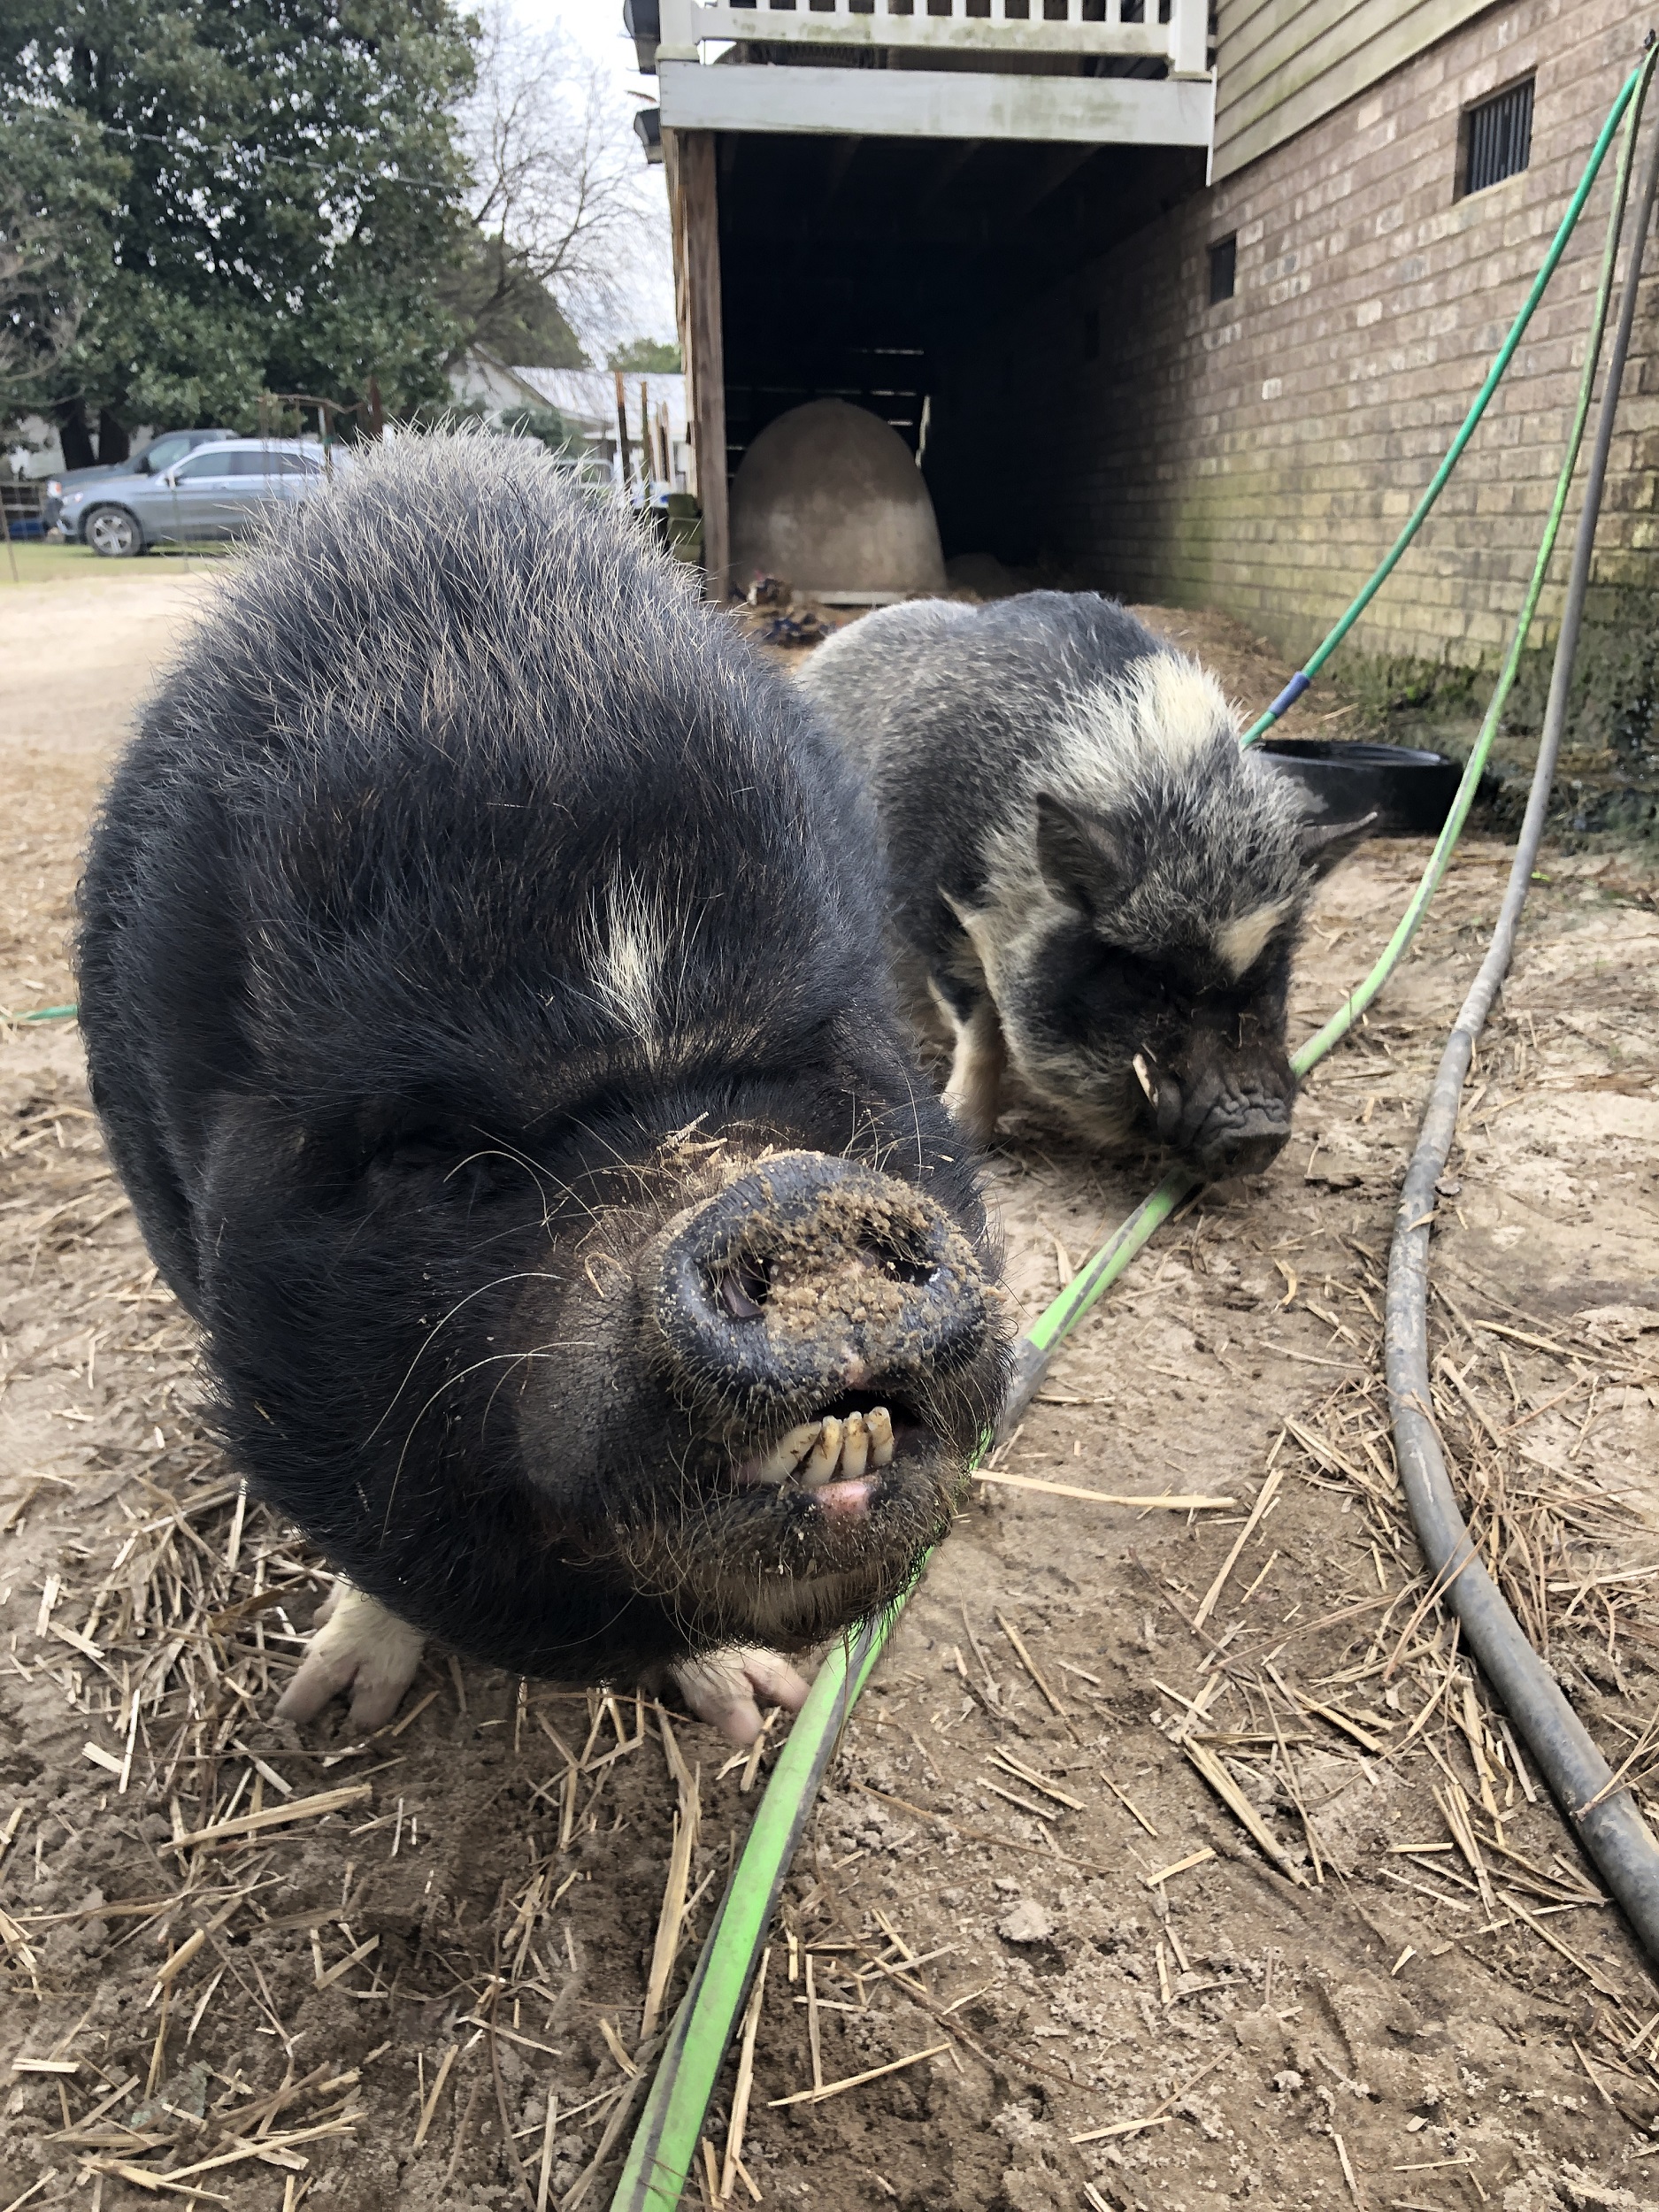 Pigs at Cotton Branch Farm Sanctuary - An animal rescue in South Carolina